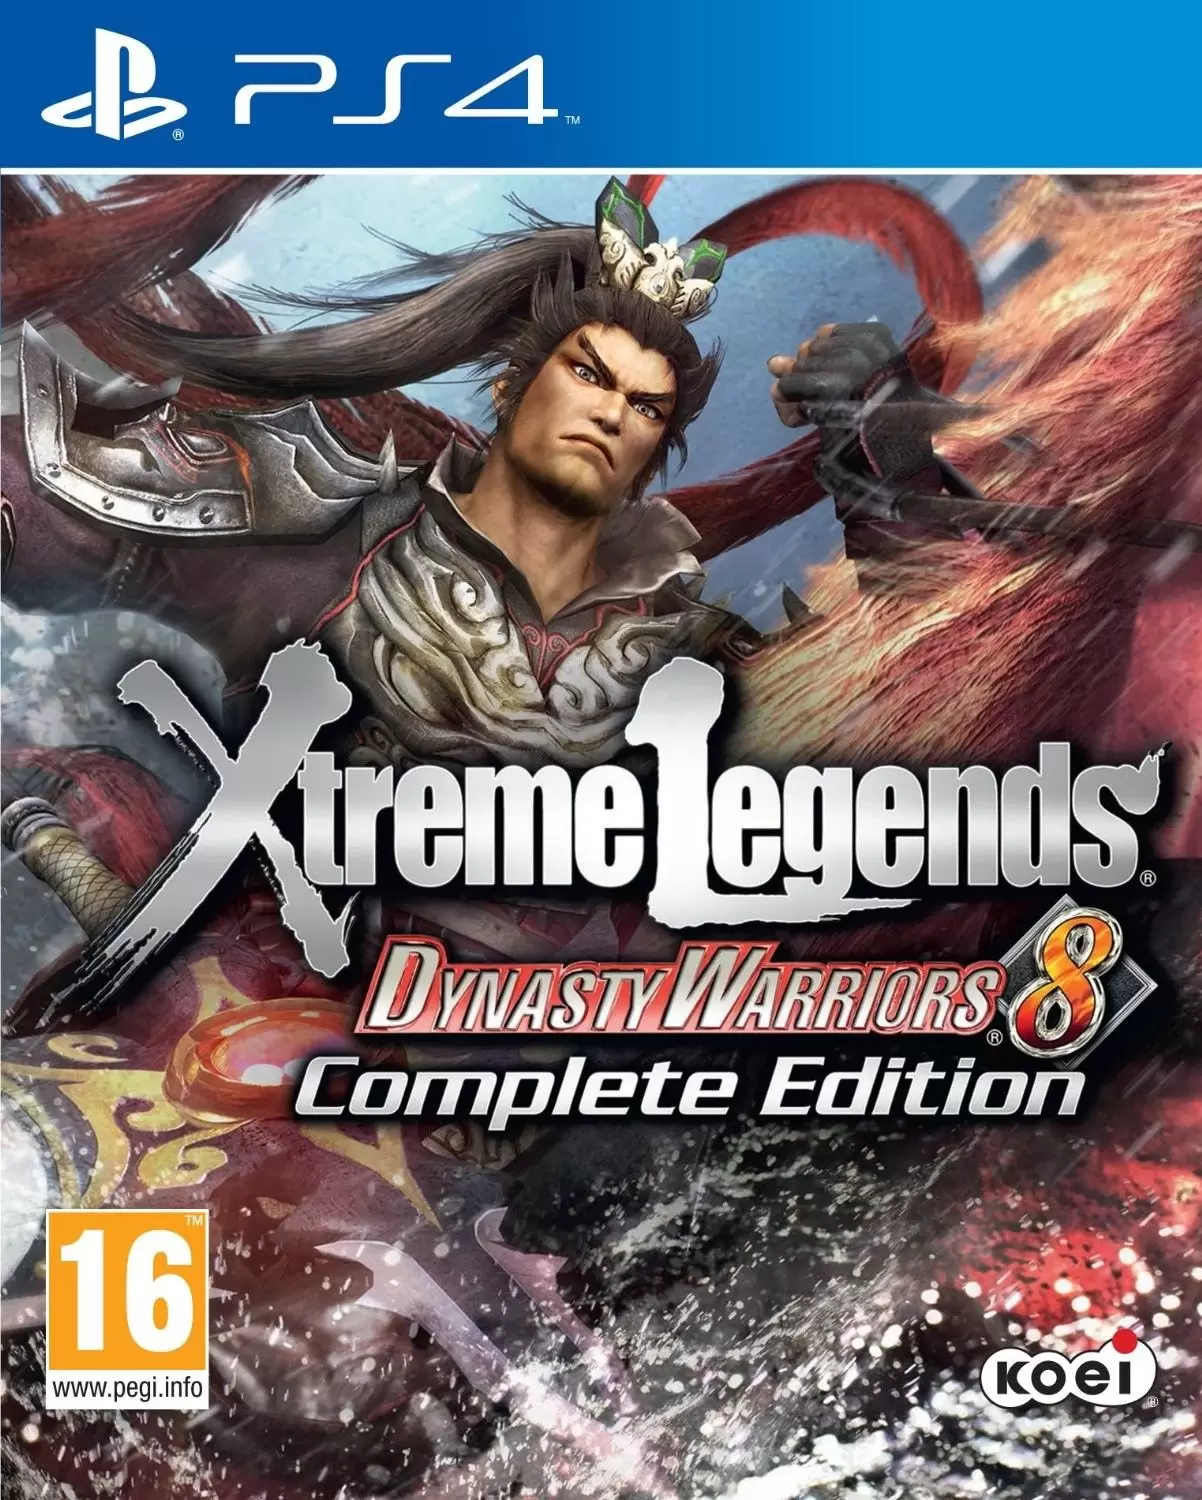 PS4 Games - Dynasty Warriors 8: Xtreme Legends Complete Edition